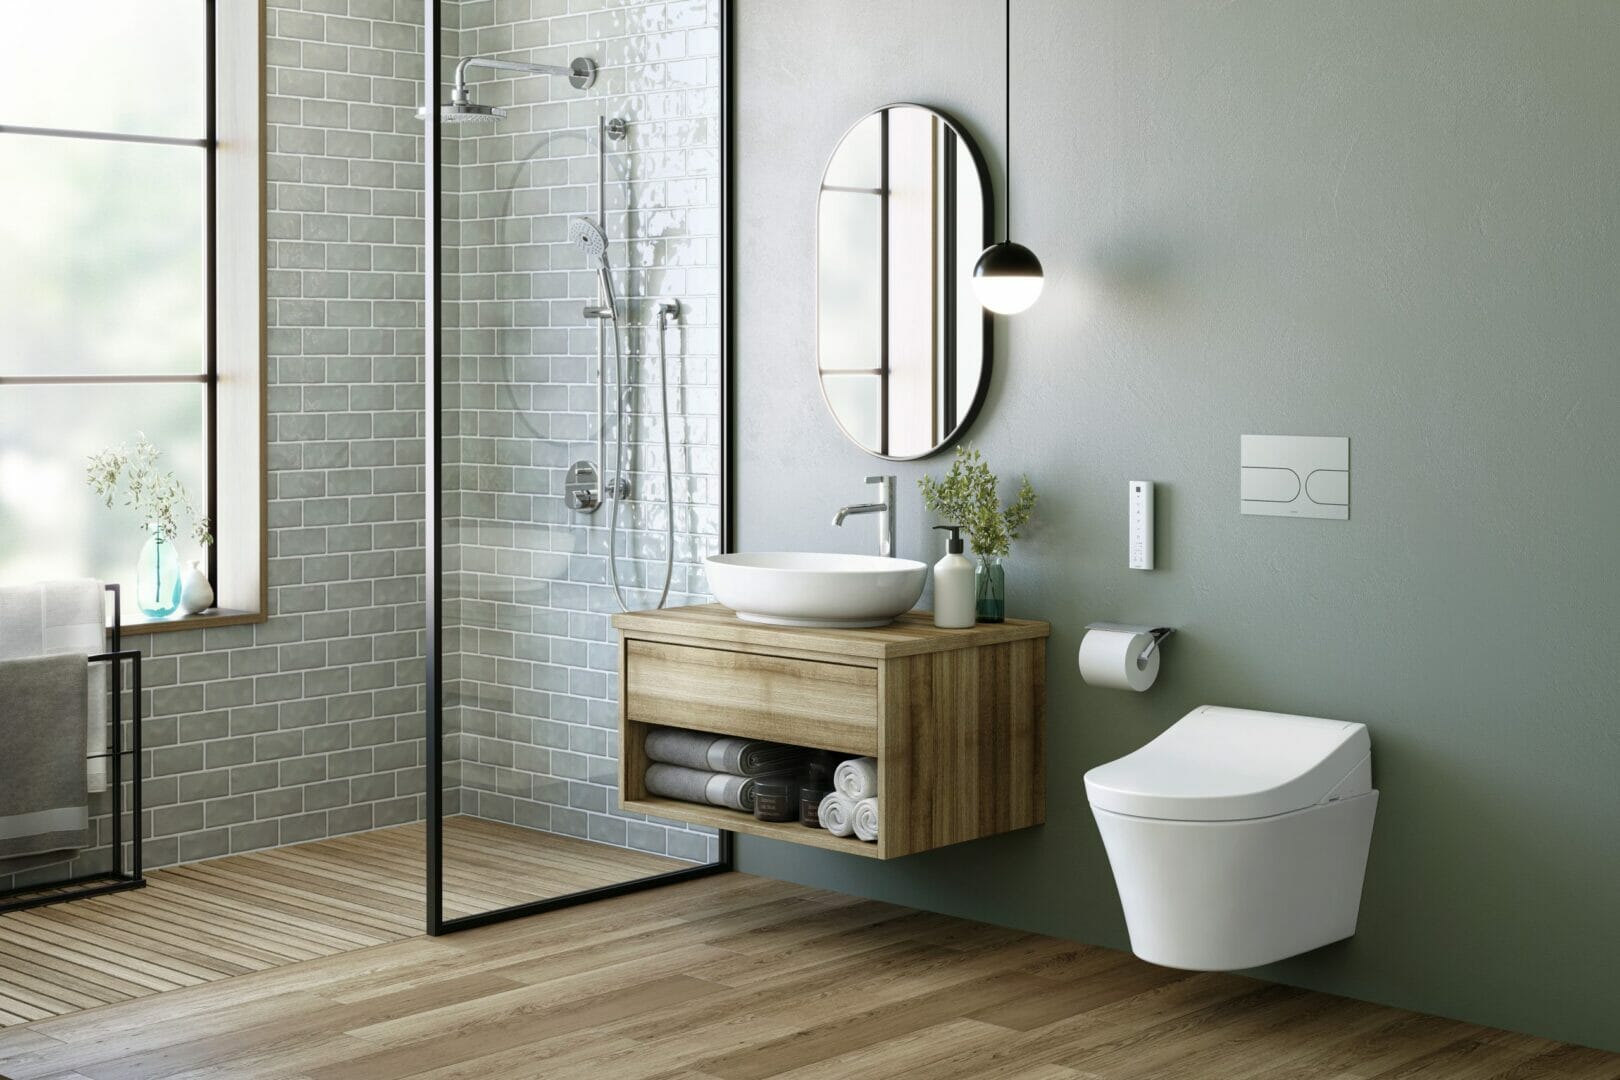 Toto launches new Washlet